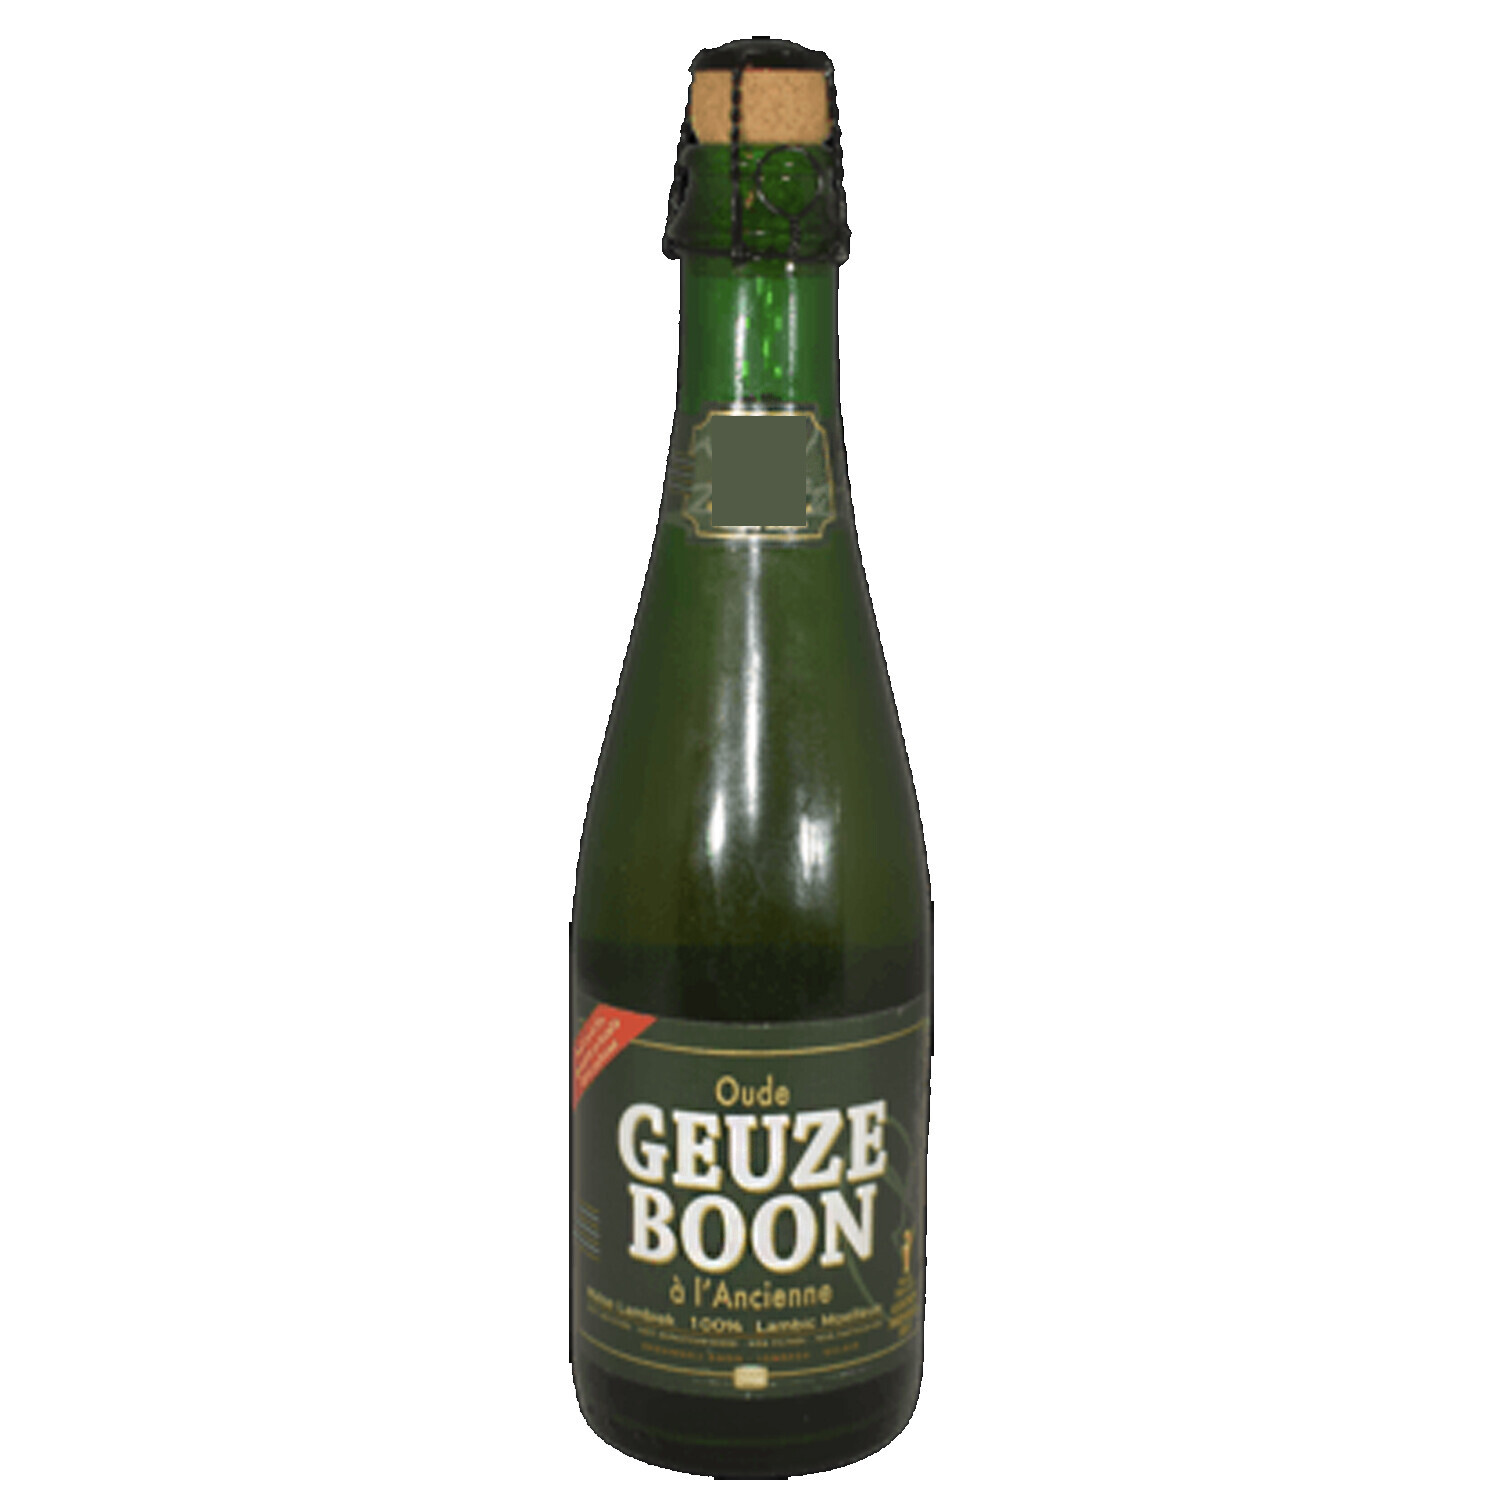 Boon Oude Geuze Lambic 375ml